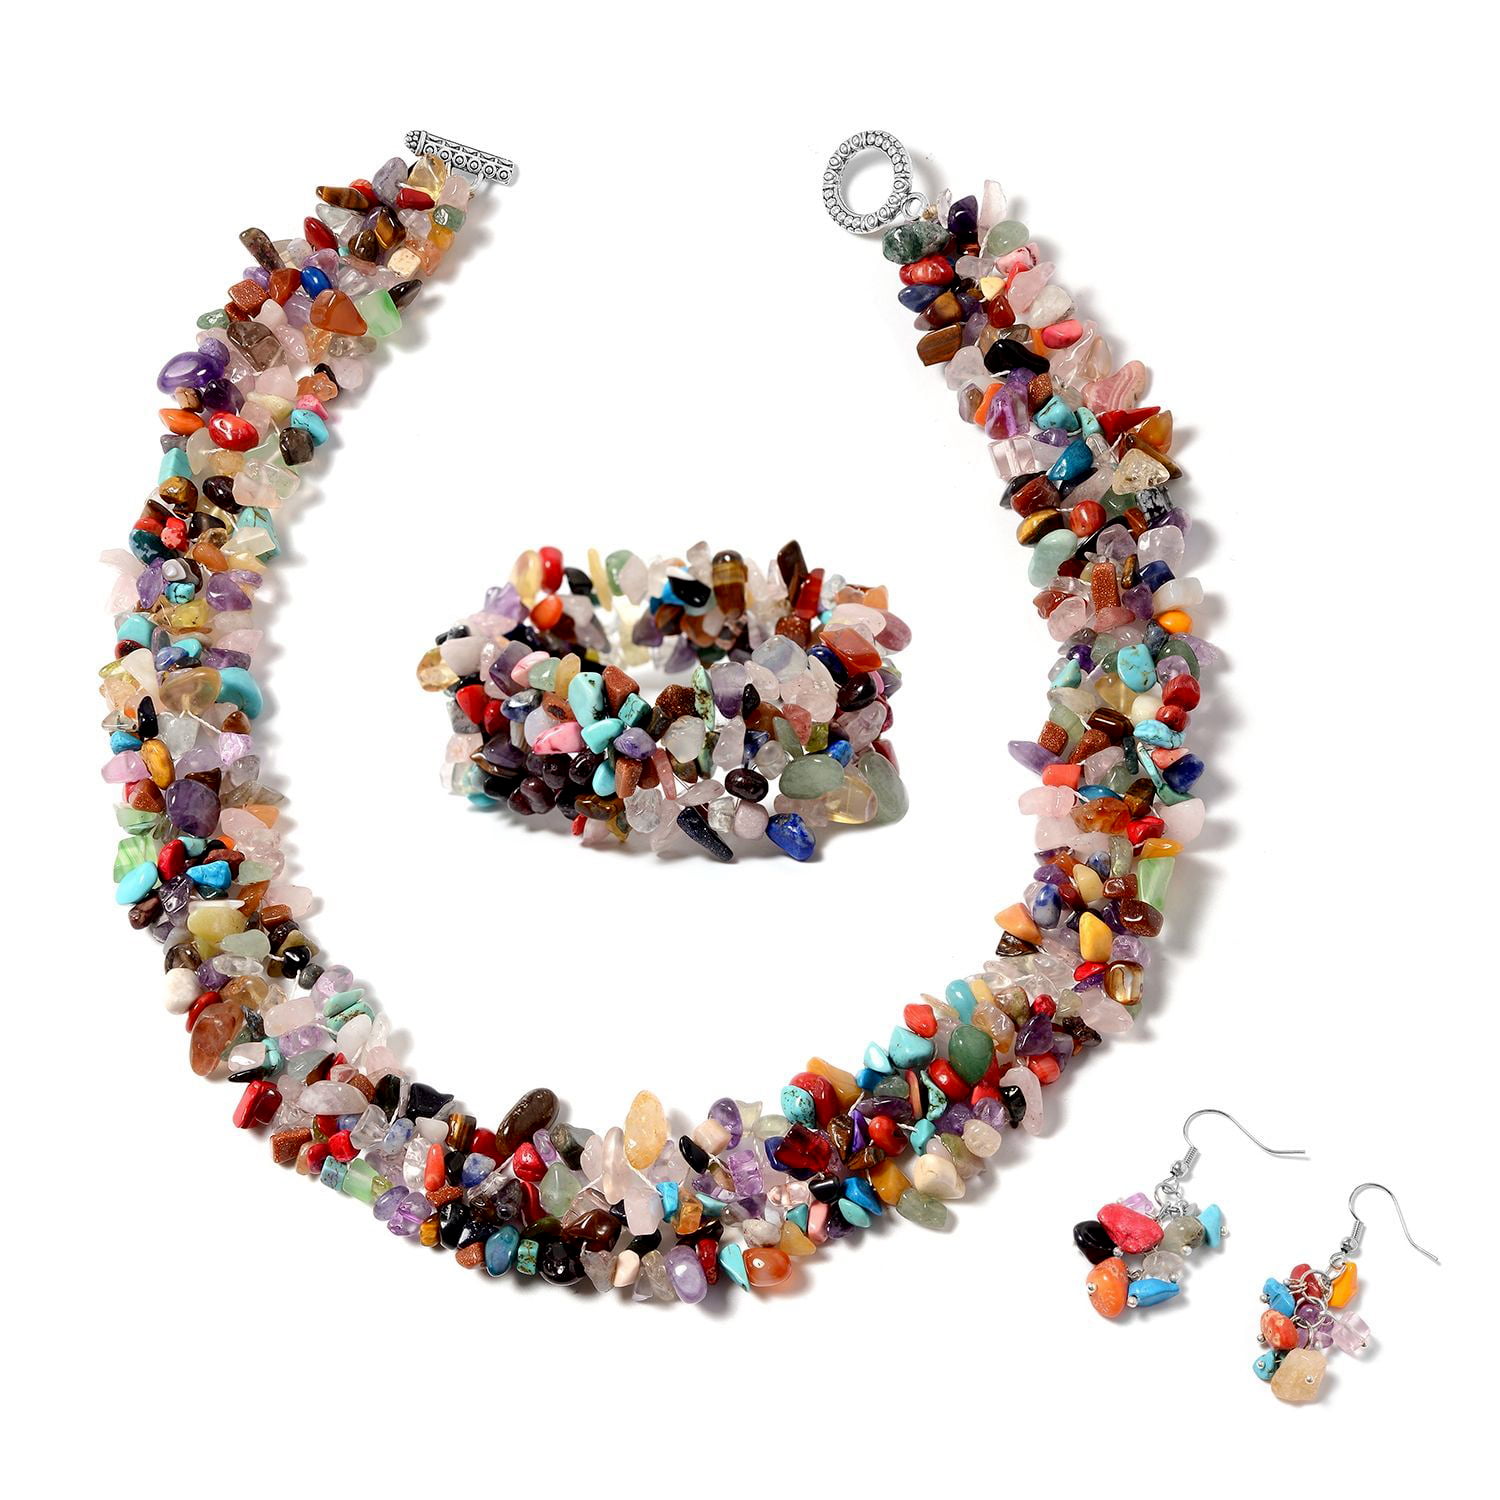 Five Layers Multi Color Lucite Bead Tri Tone Bead Necklace Earring Set 